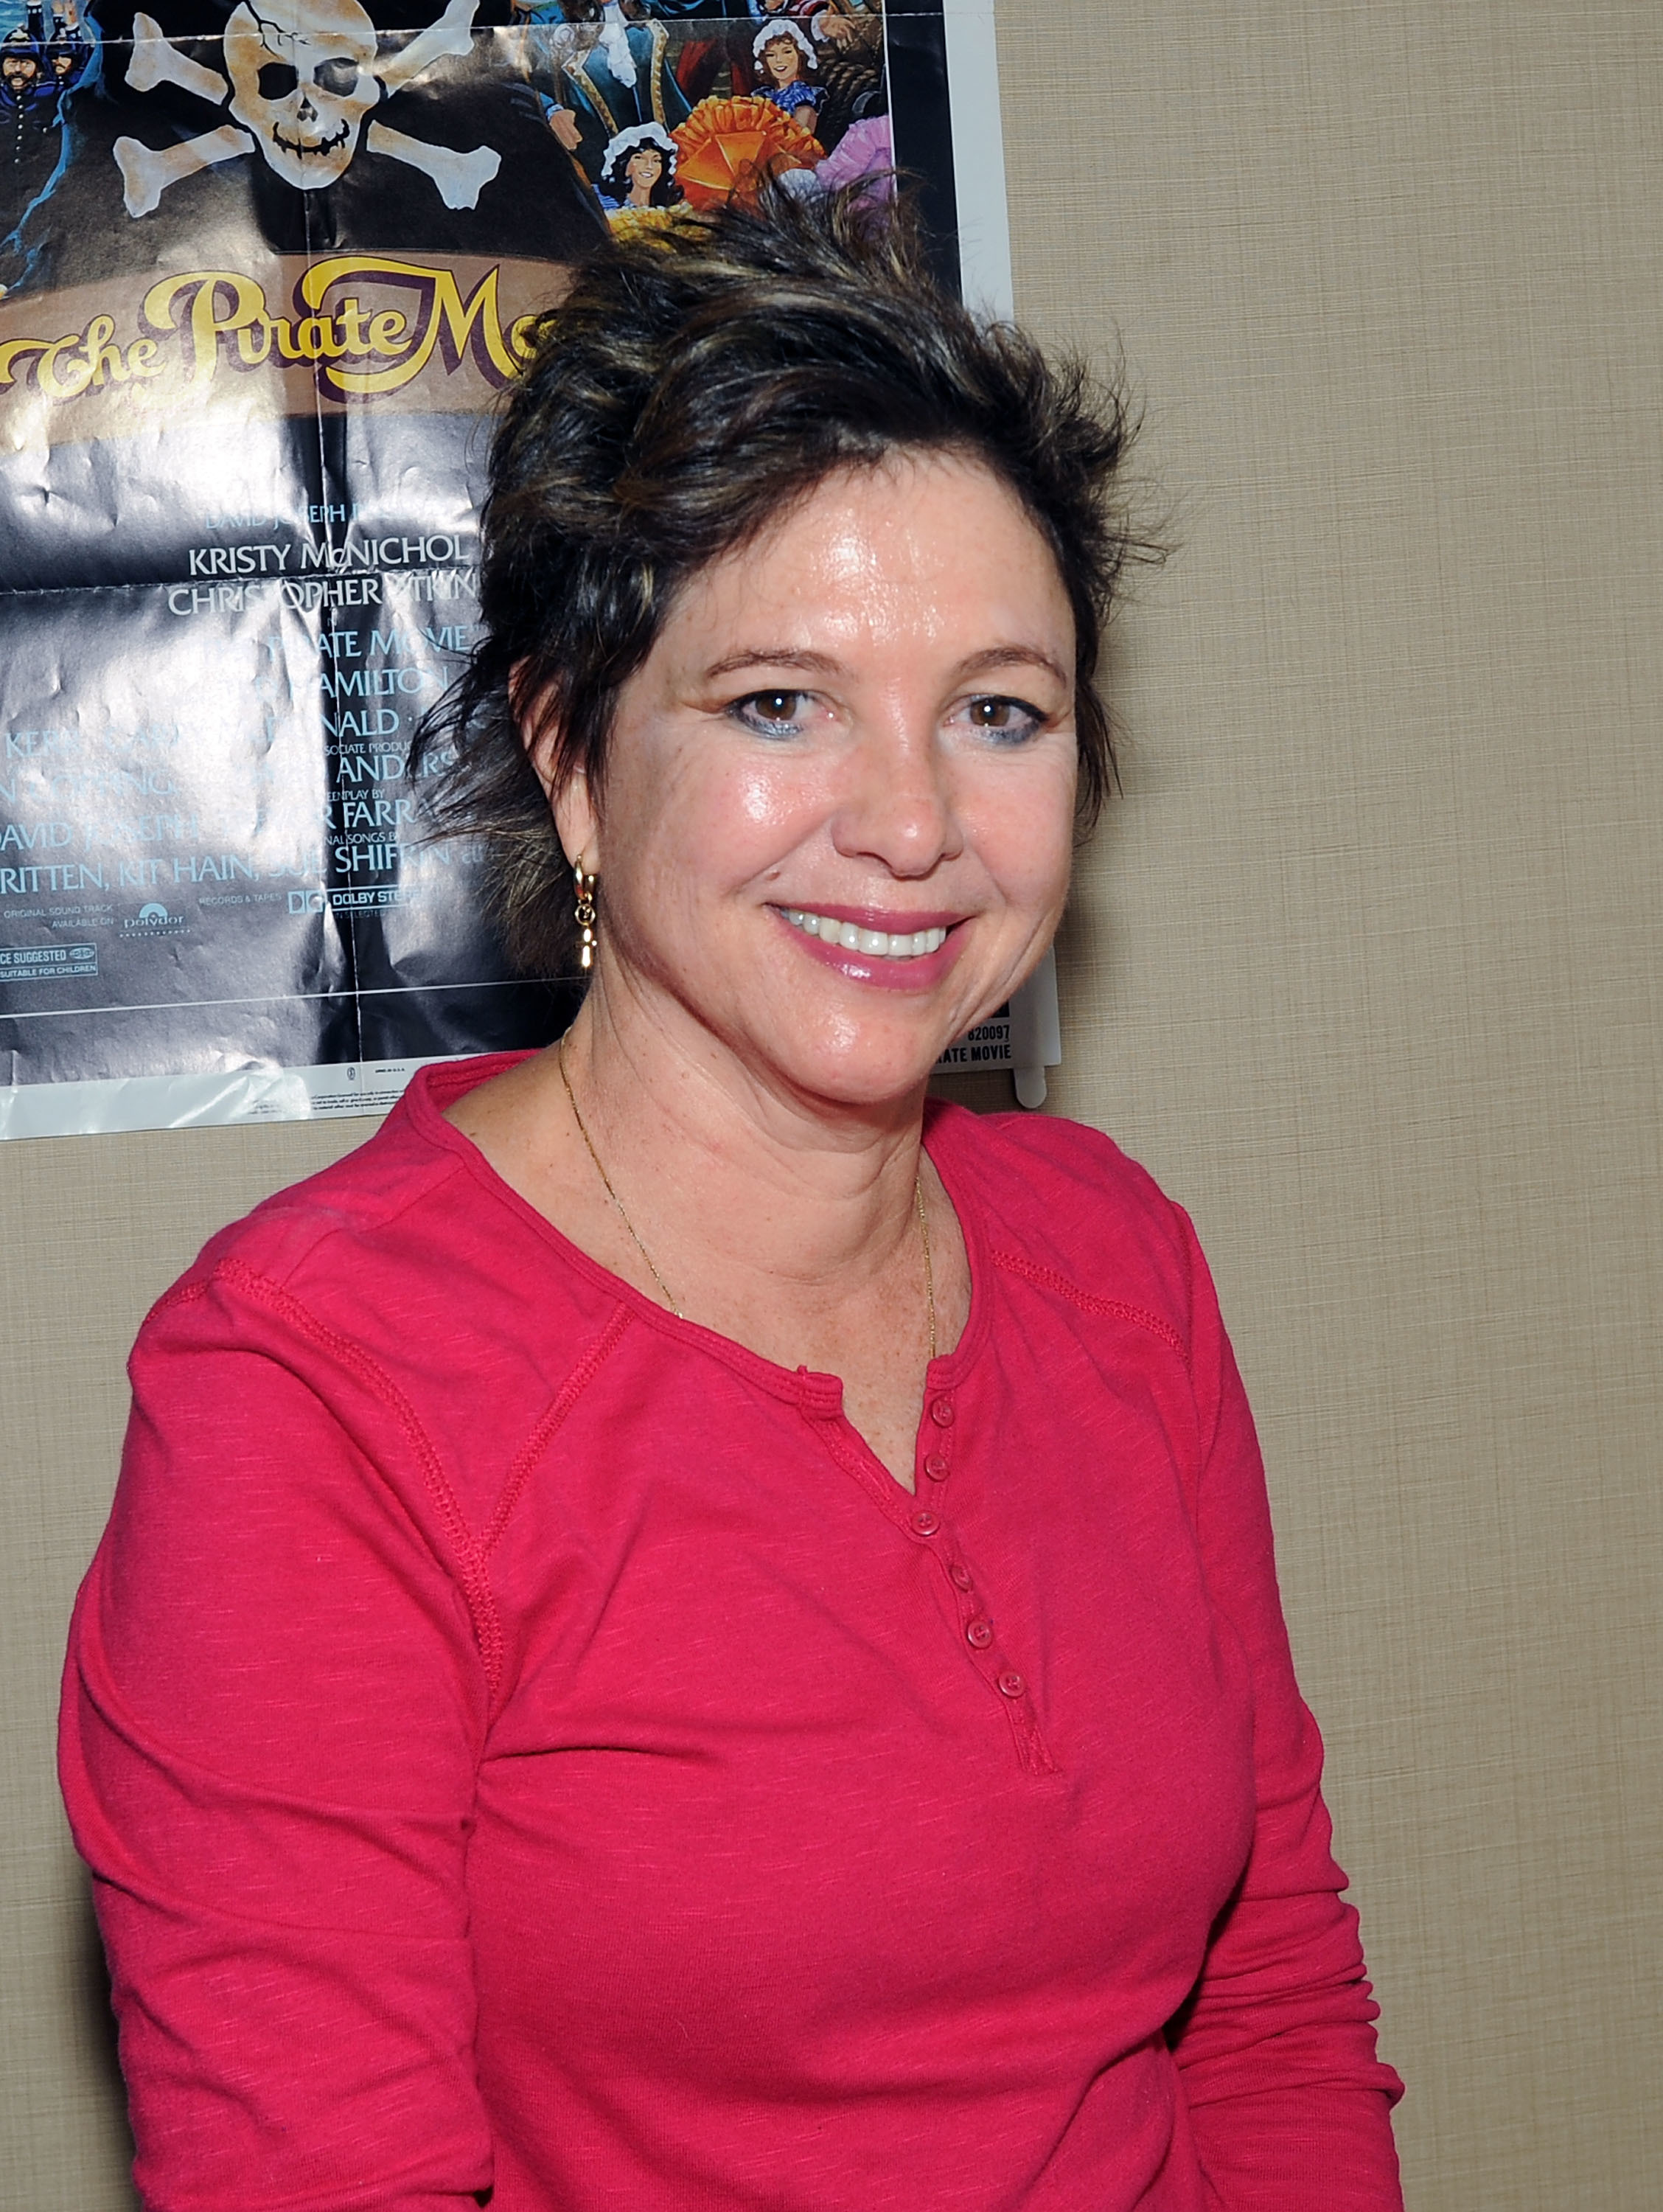 <p>In 1992, Kristy McNichol left the cast of "Empty Nest" after she was diagnosed with bipolar disorder. She returned for the sitcom's final episode but has not appeared on camera that often since. She lent her voice to "Invasion America" in 1998 and in 2012 appeared in the short film "Call to Action to Mayor Bloomberg: Sodas & Soap Operas." In 2012, the former child star revealed that she's gay and had been living with her partner, Martie Allen, for the past two decades.</p>